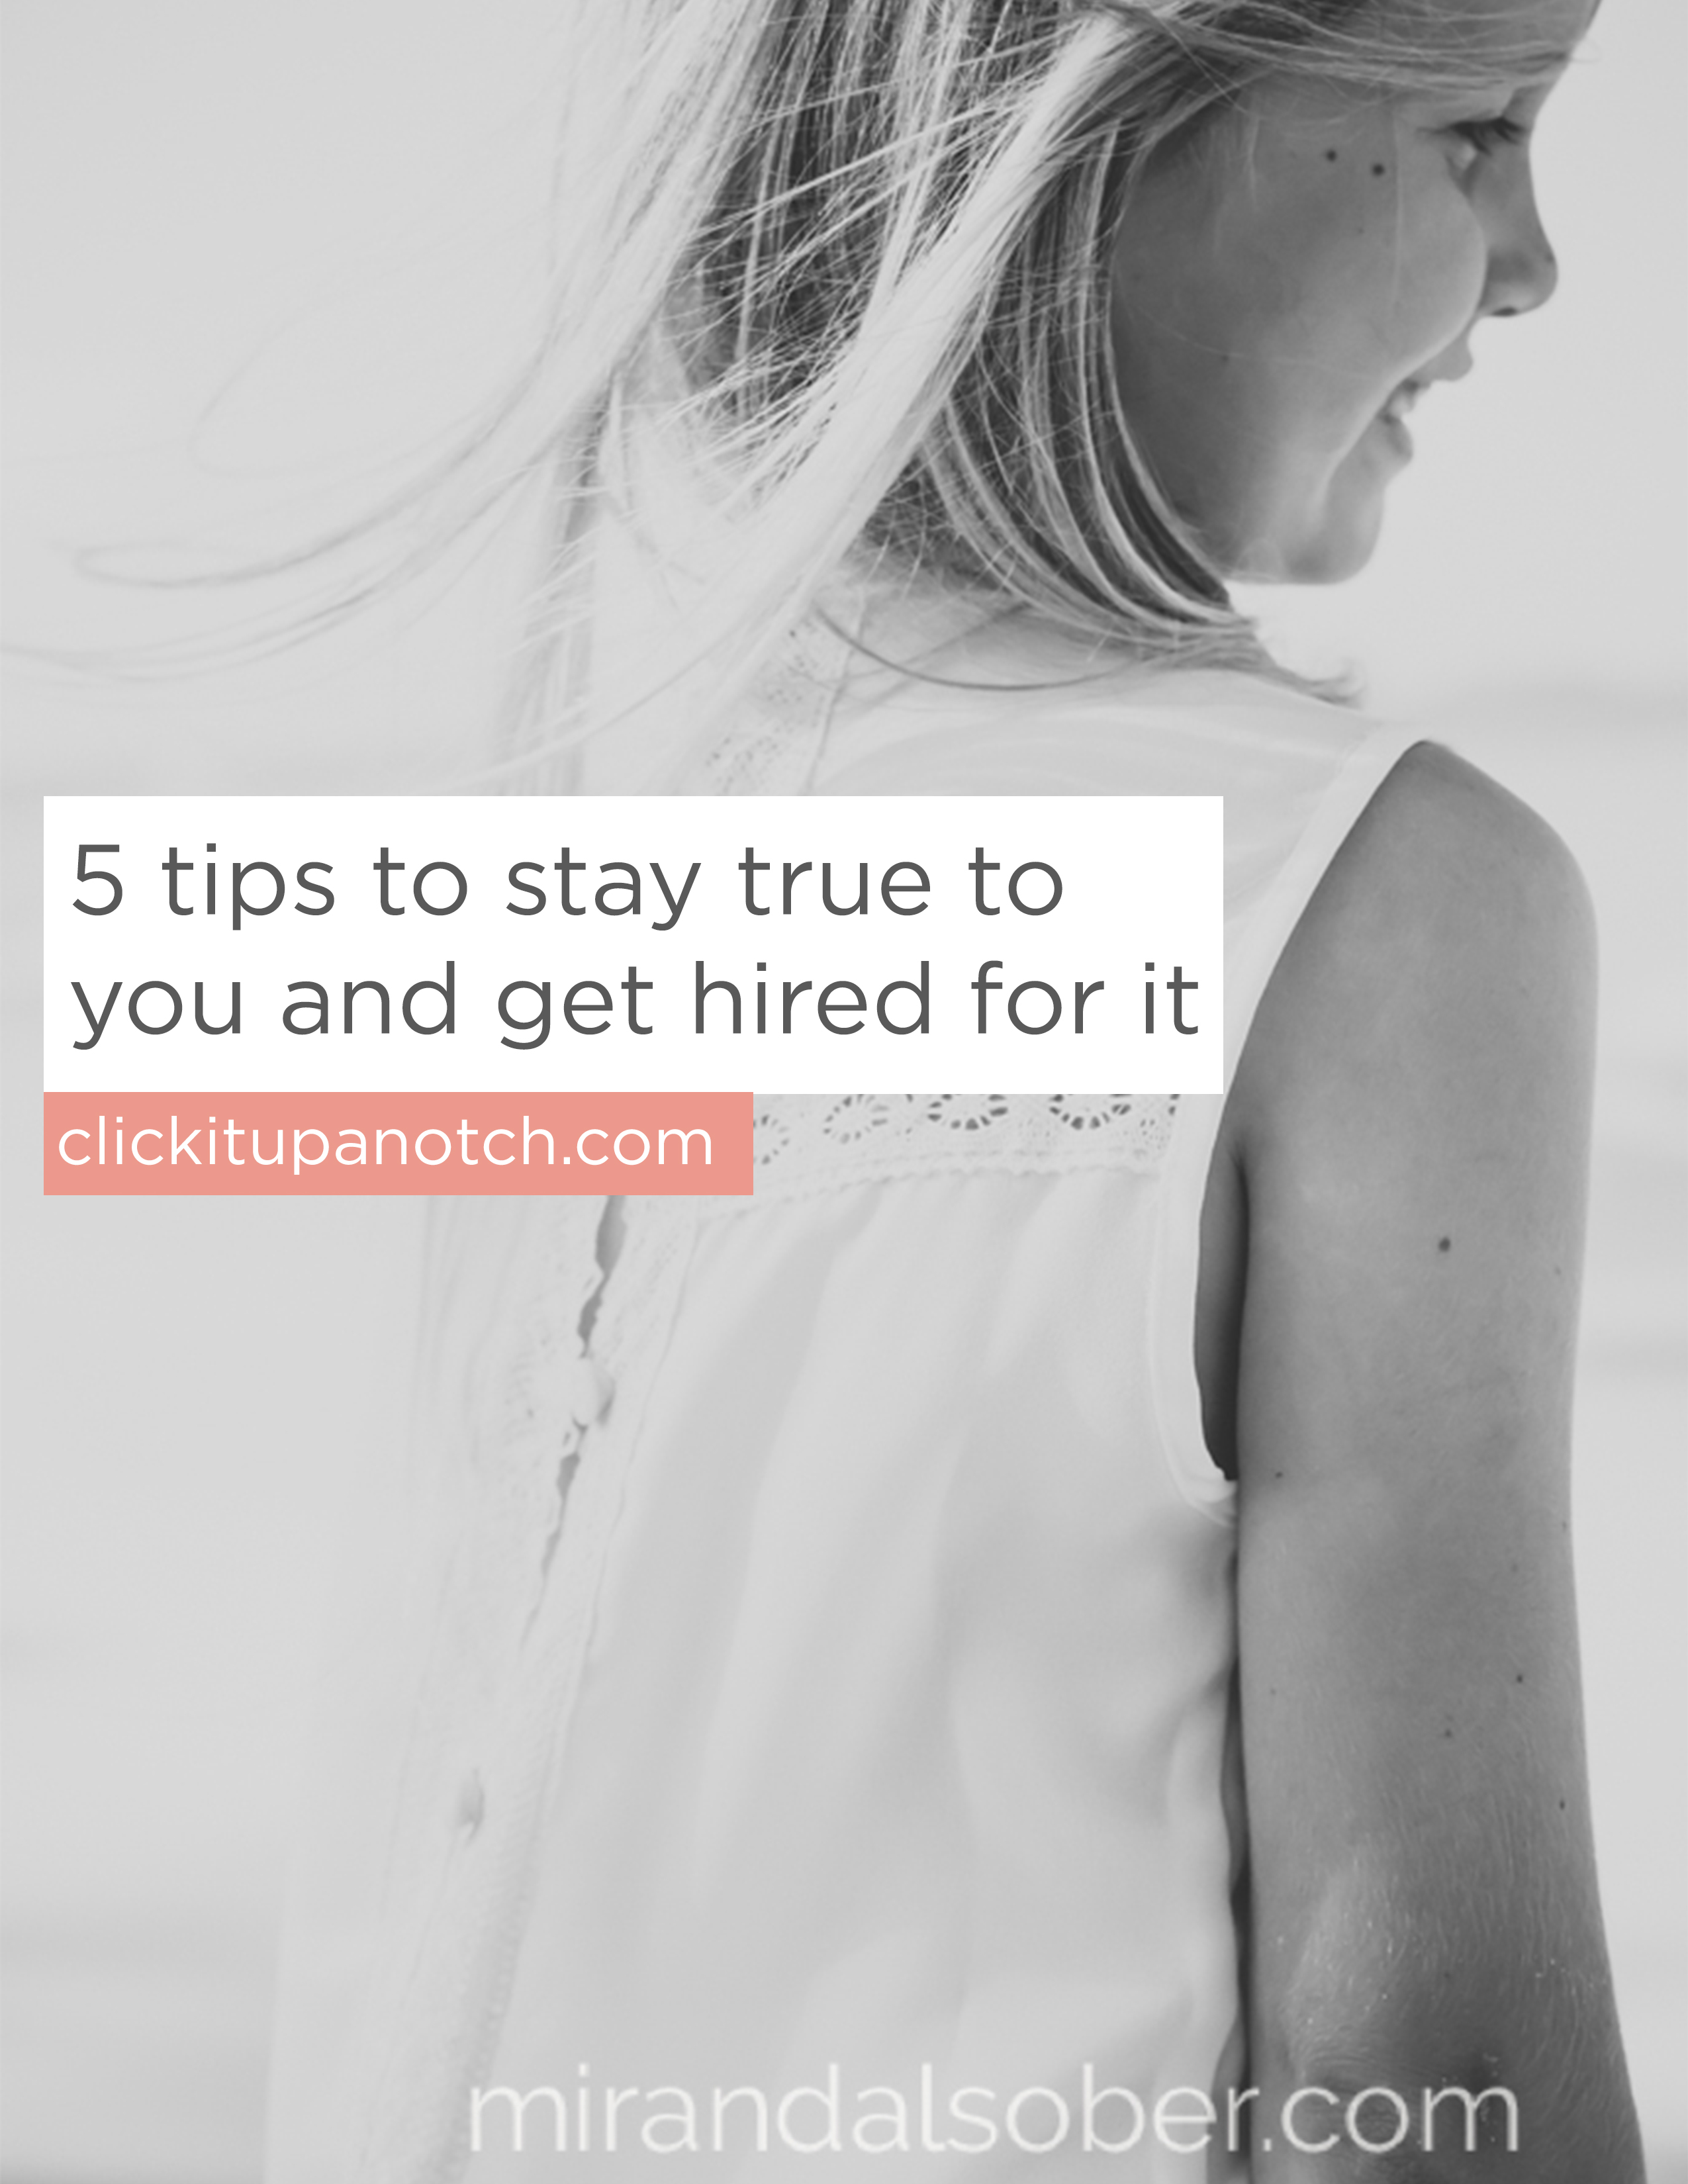 5 tips to stay true to who you are and get hired for it by Miranada Sober via Click it Up a Notch